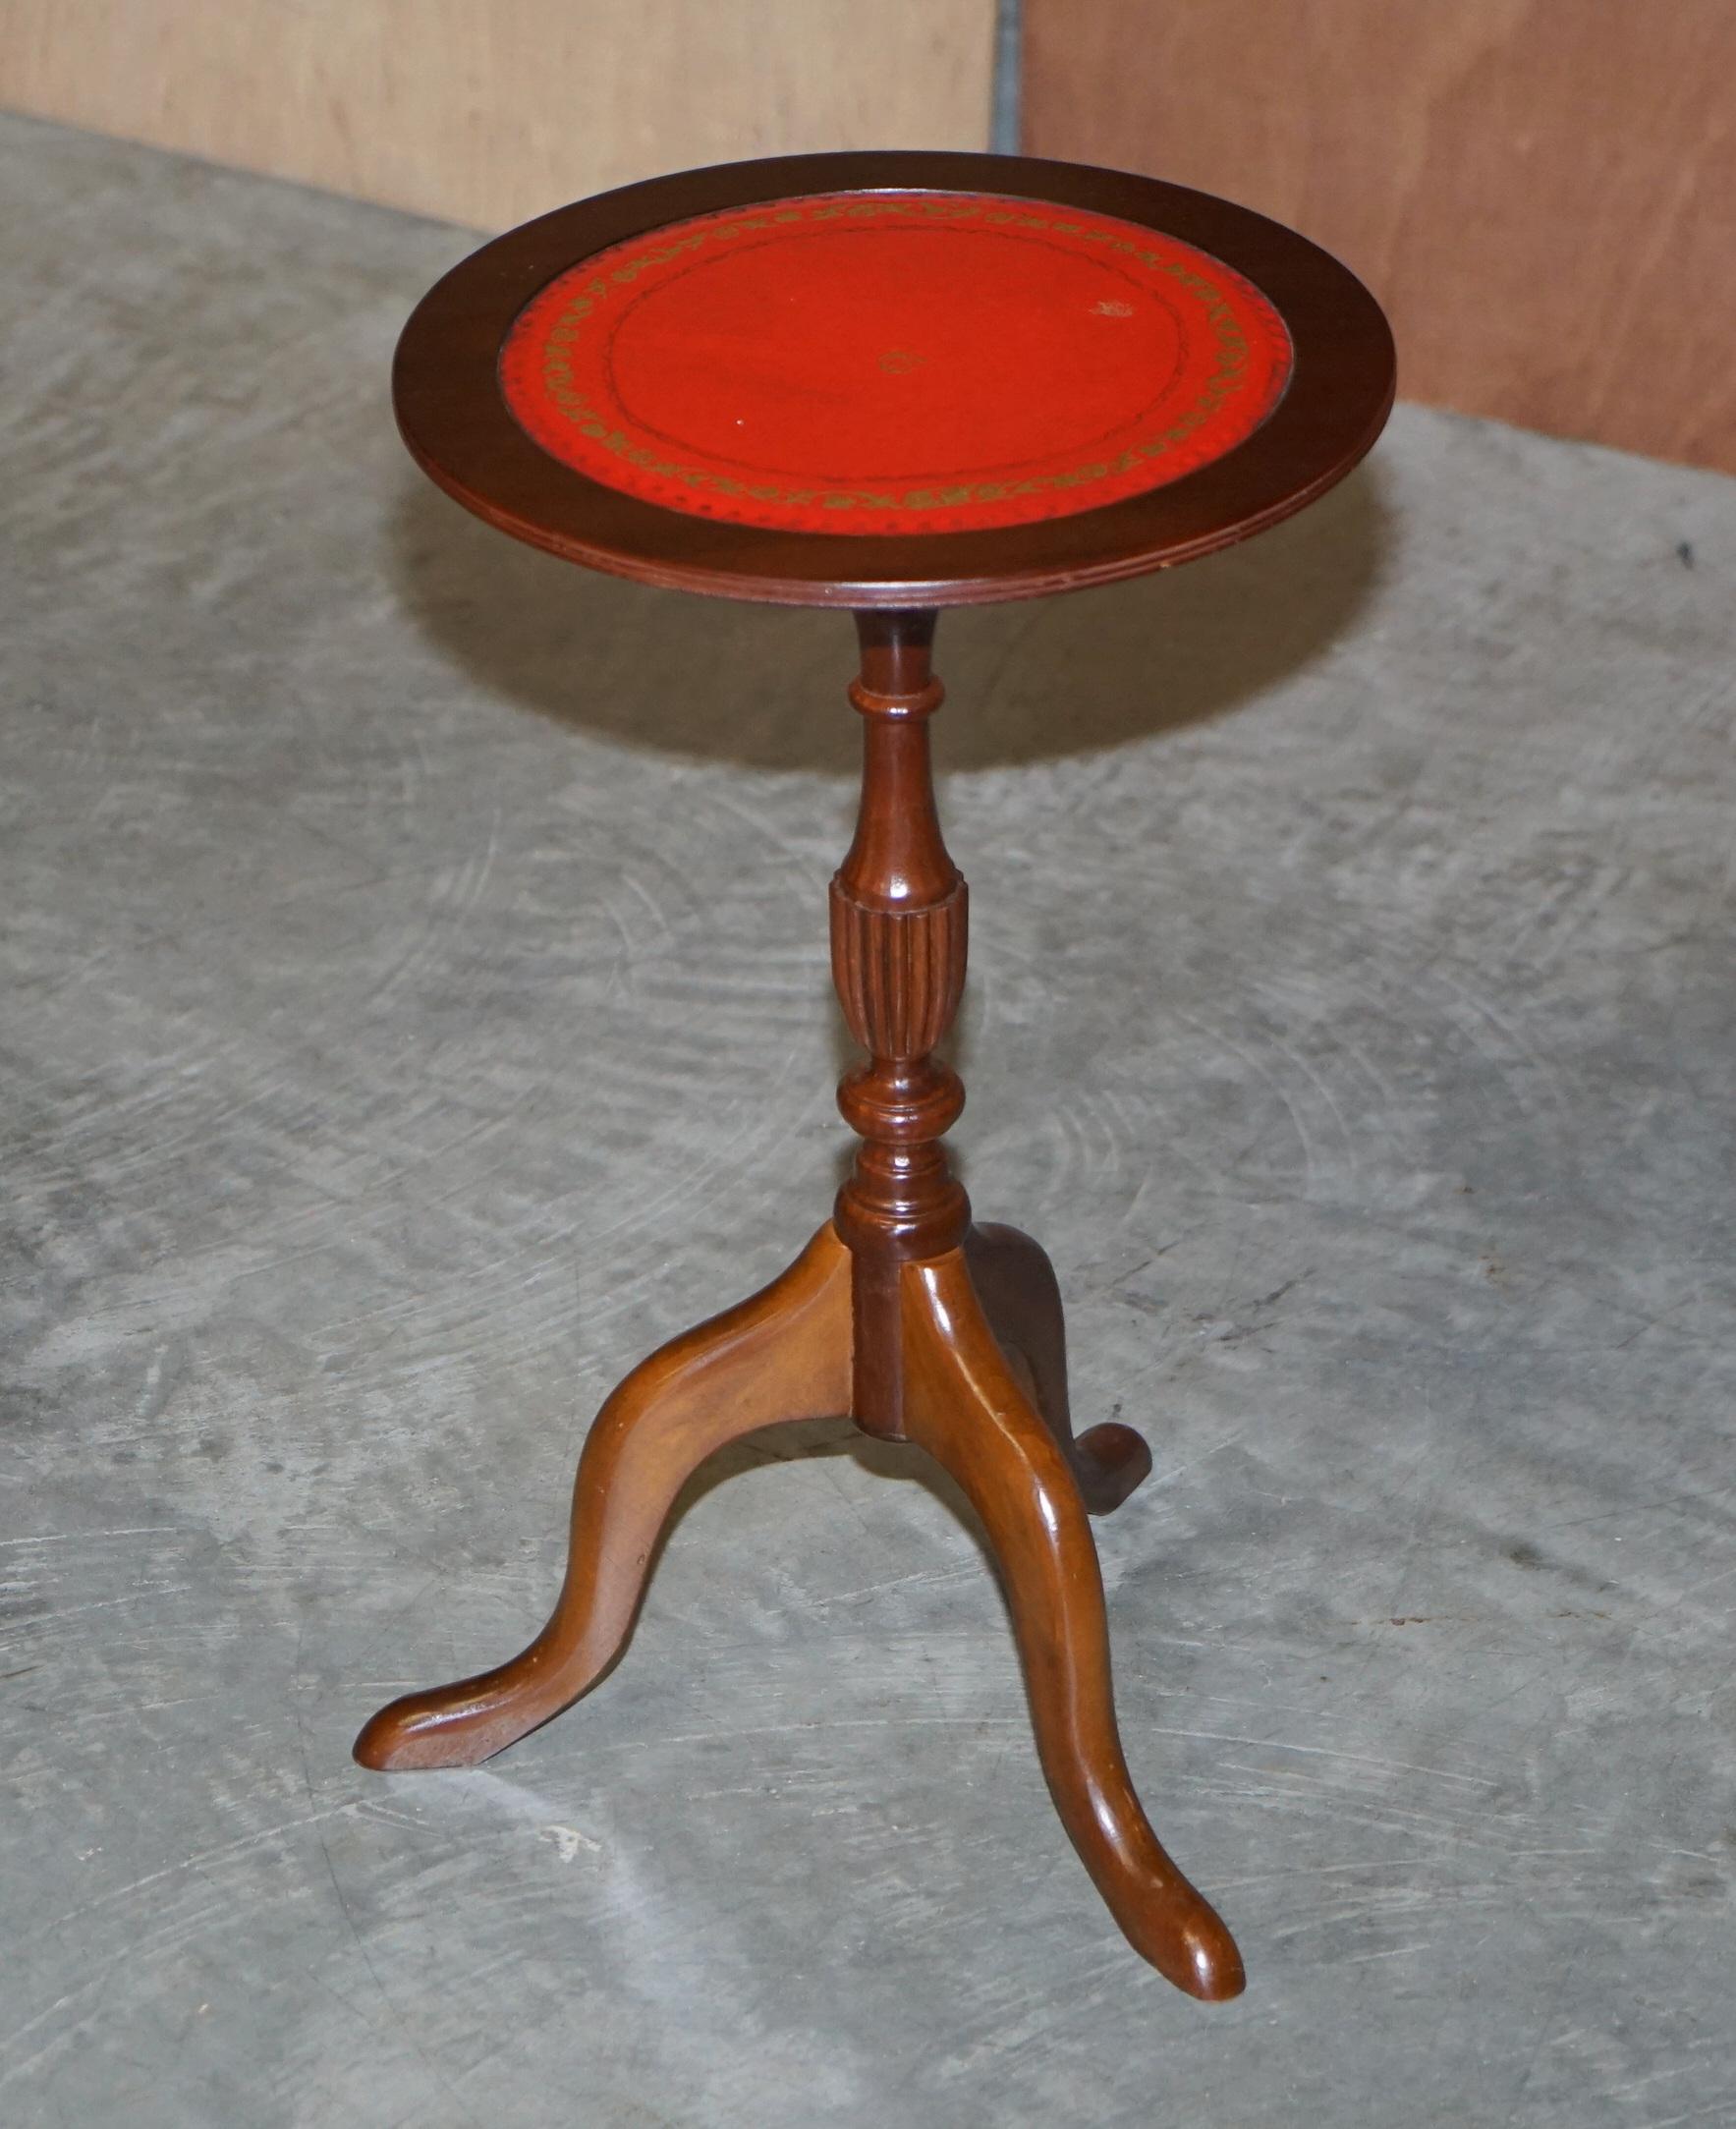 We are delighted to offer this lovely small Bevan Funell vintage light mahogany with red leather top lamp or side table.

A good-looking well-made tripod table in good, we have cleaned waxed and polished it from top to bottom, there will be normal